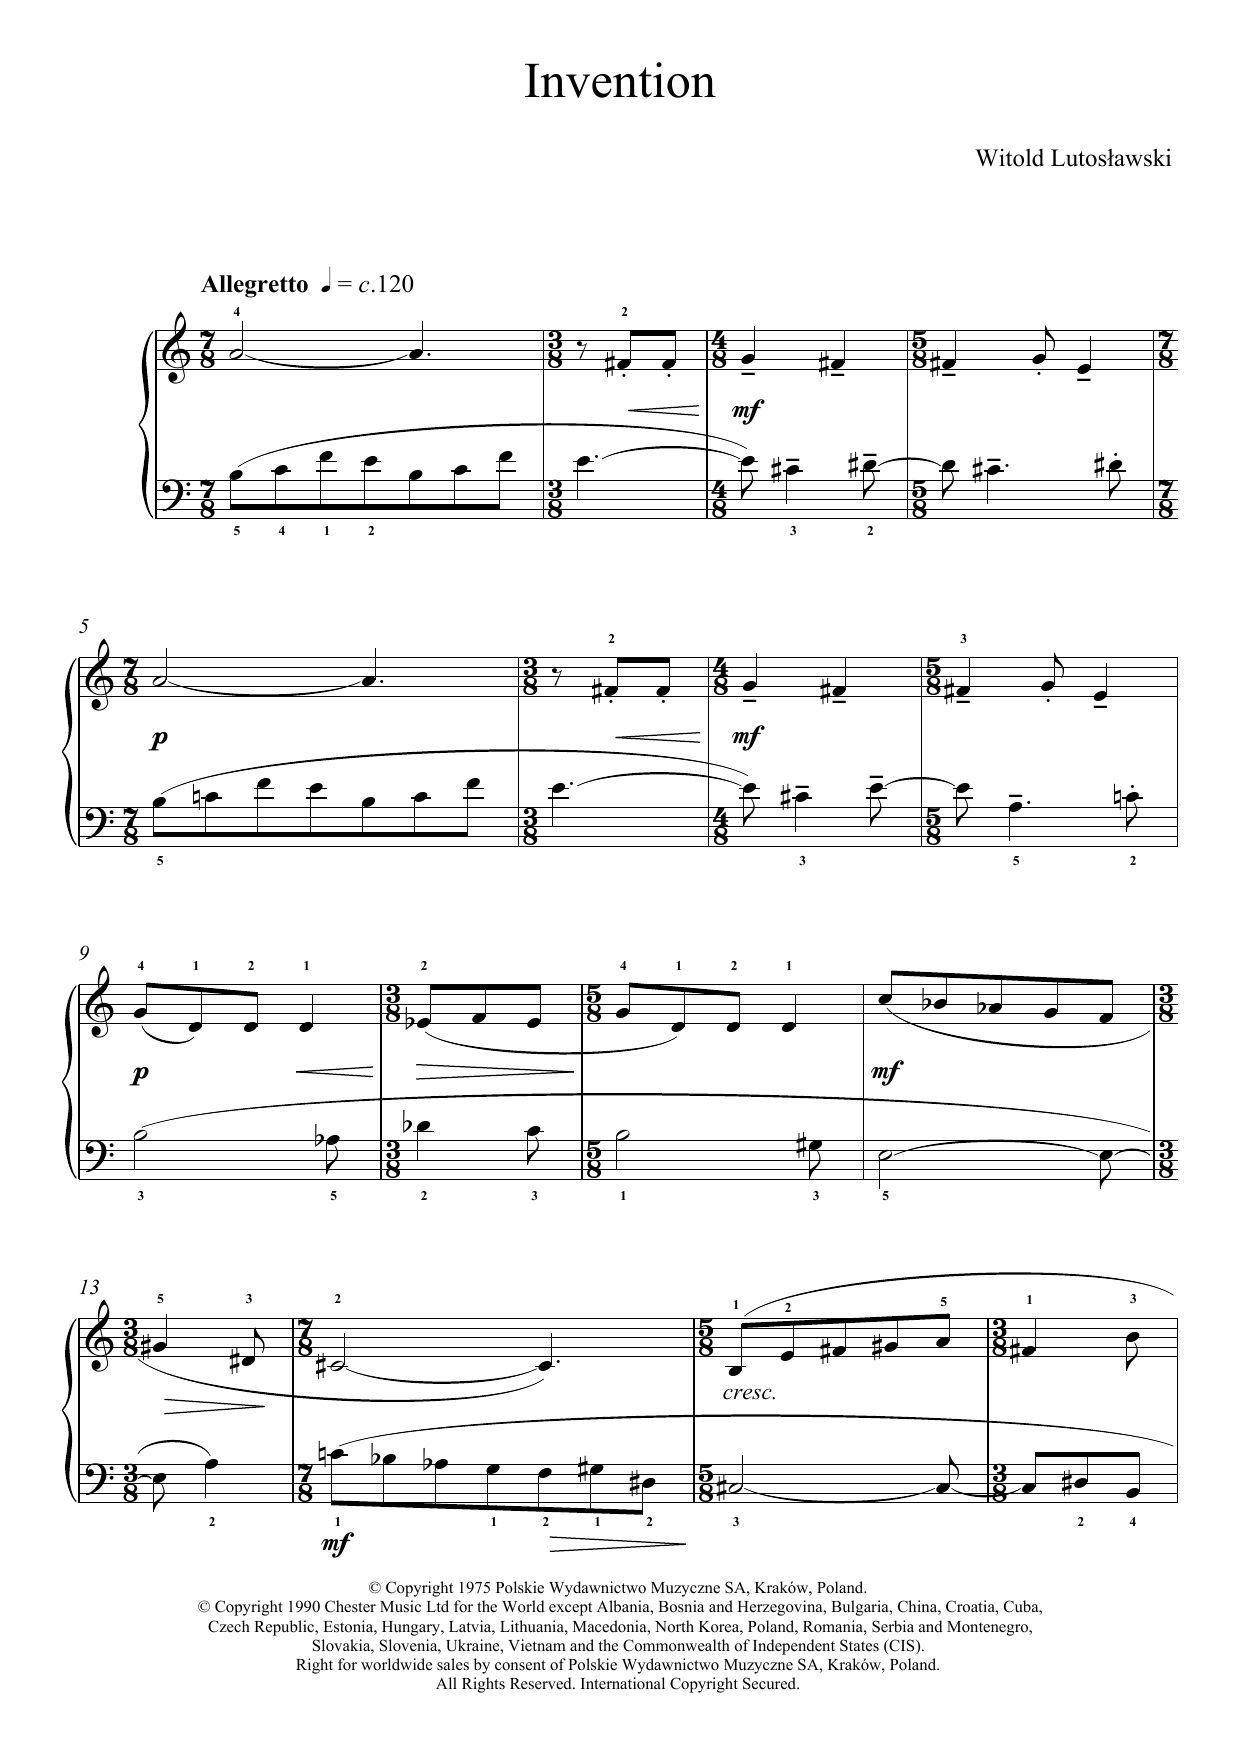 Download Witold Lutoslawski Invention Sheet Music